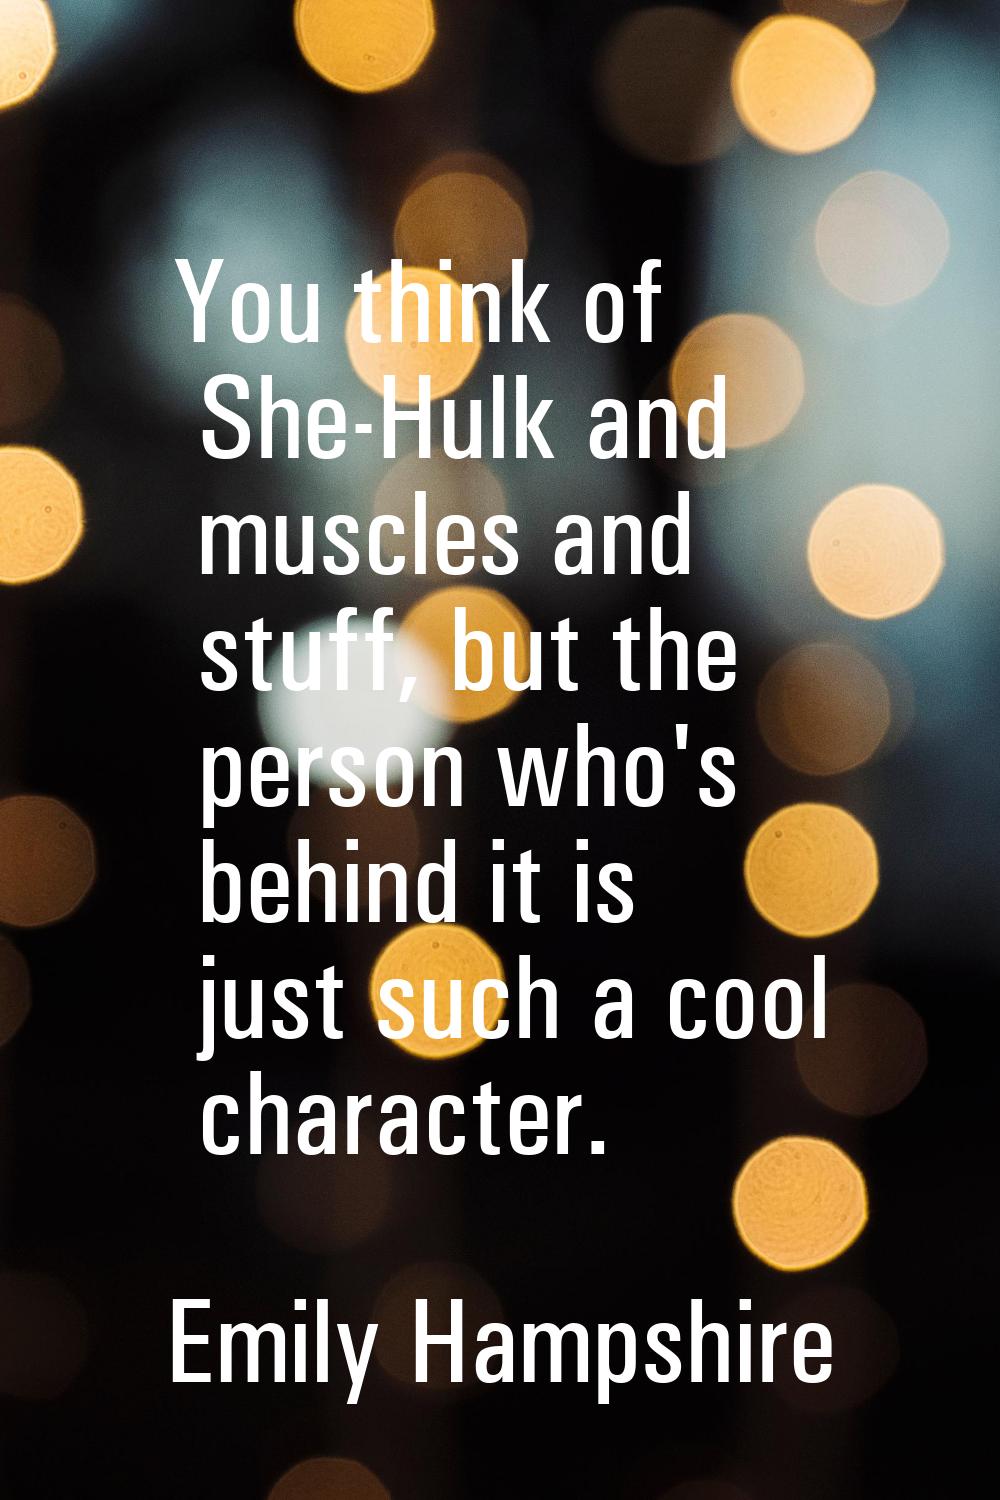 You think of She-Hulk and muscles and stuff, but the person who's behind it is just such a cool cha